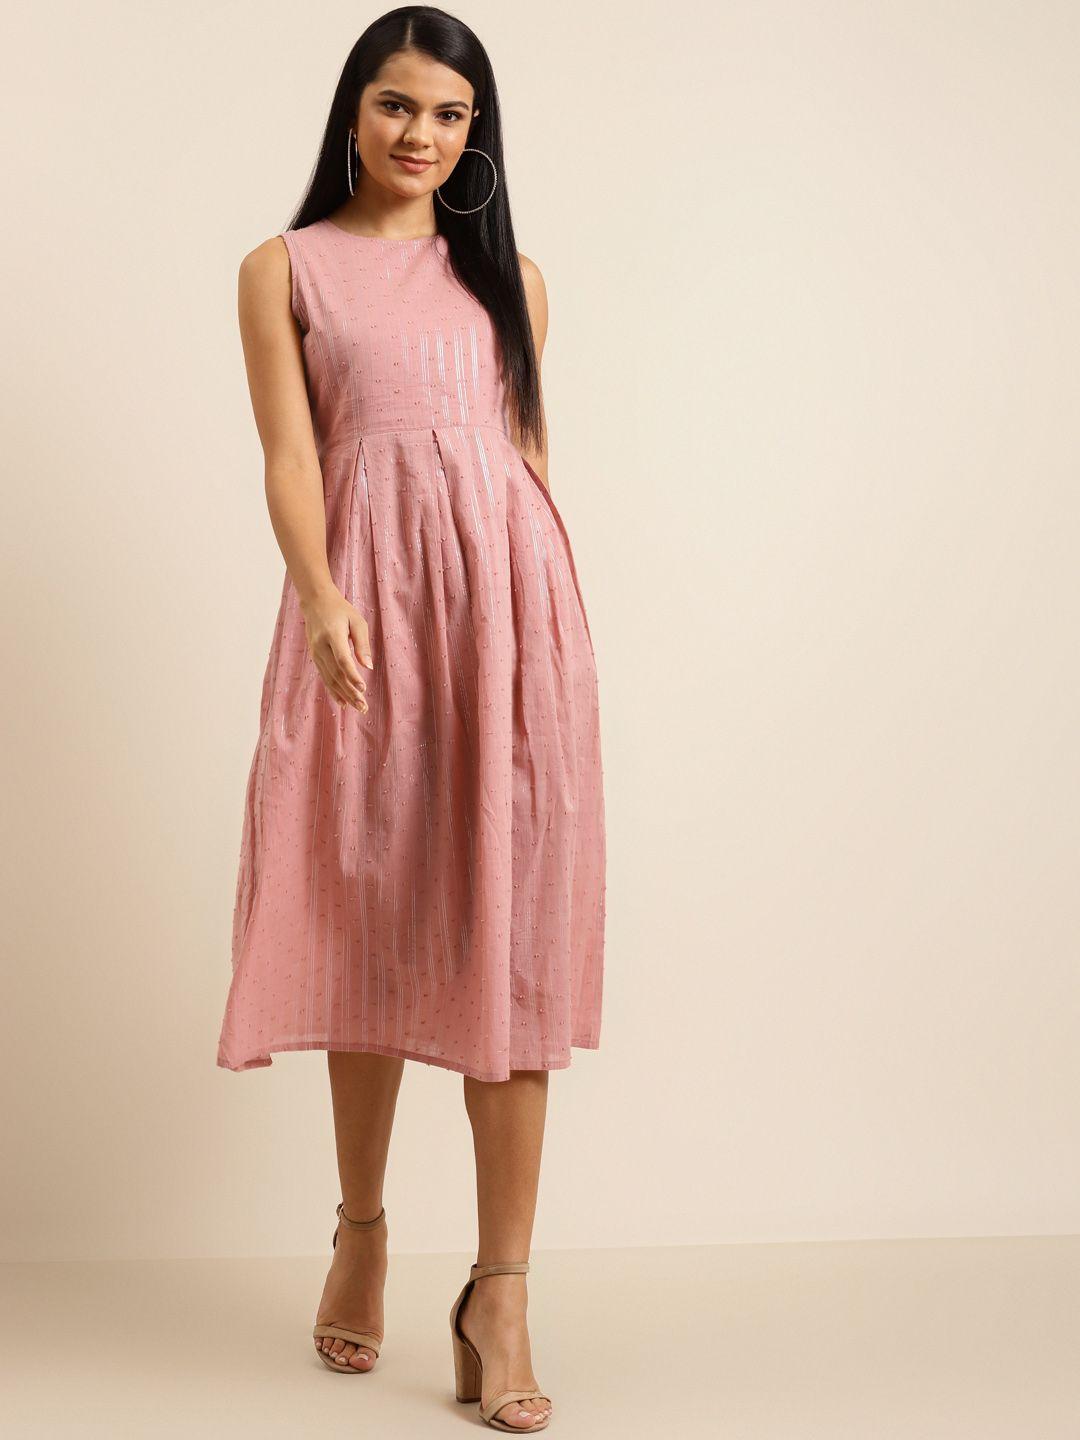 shae by sassafras women dusty pink pure cotton dobby weave striped a-line dress